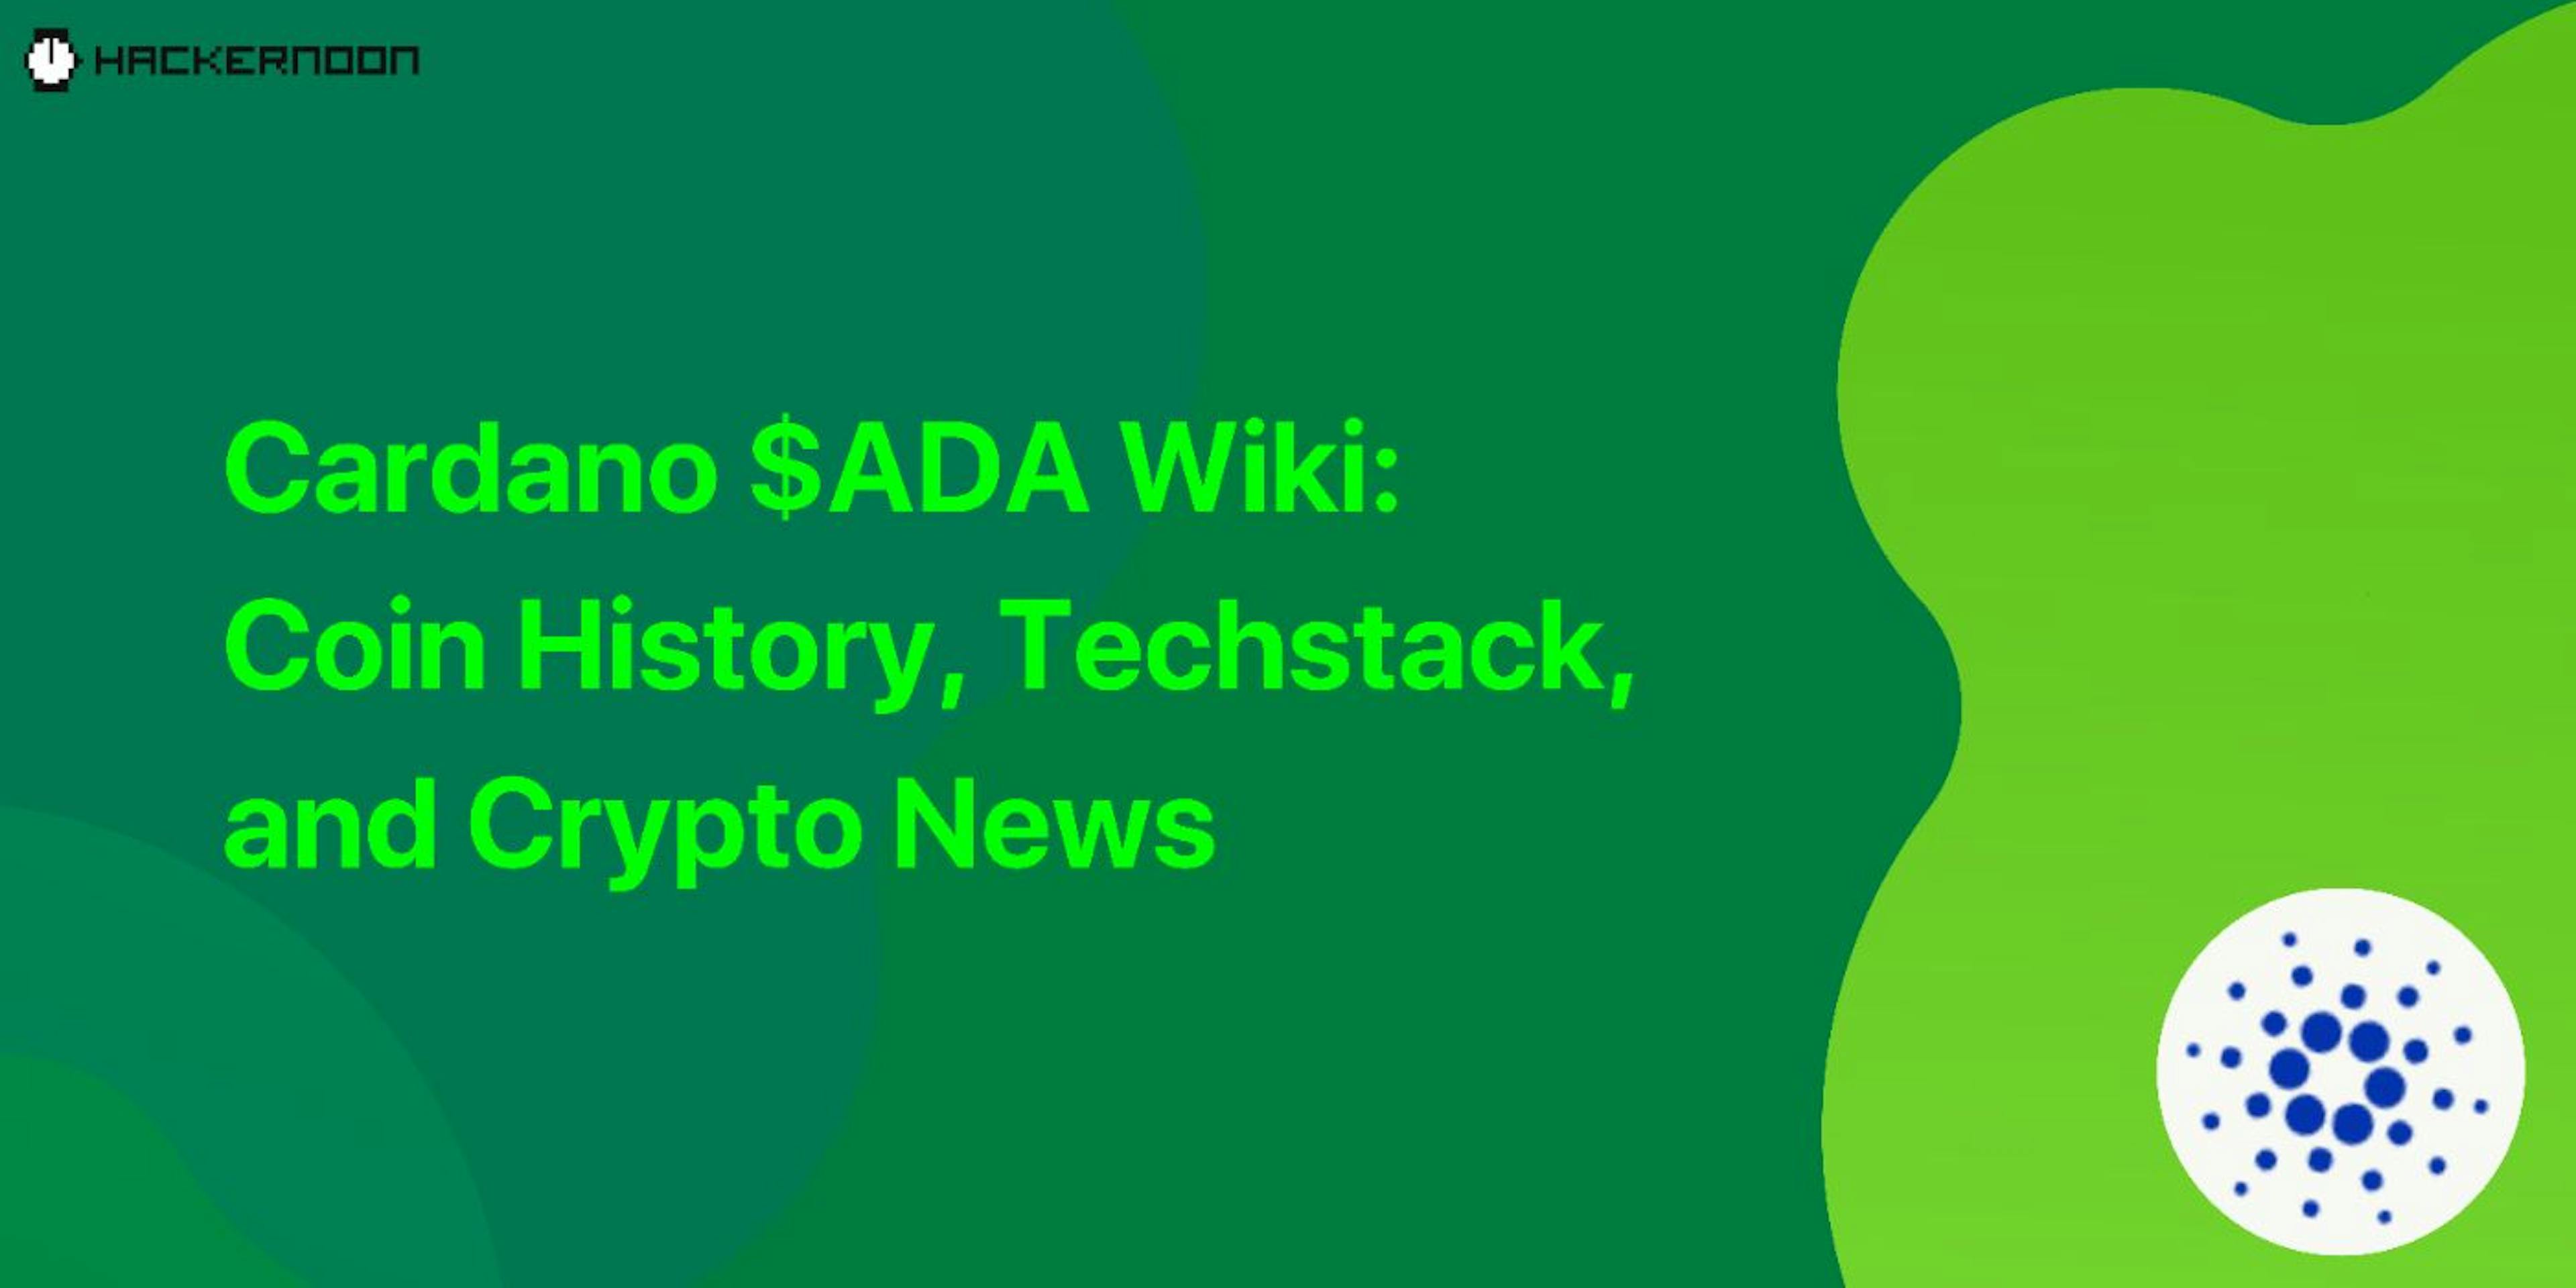 featured image - CARDANO $ADA Wiki: Coin History, Techstack, and Crypto News